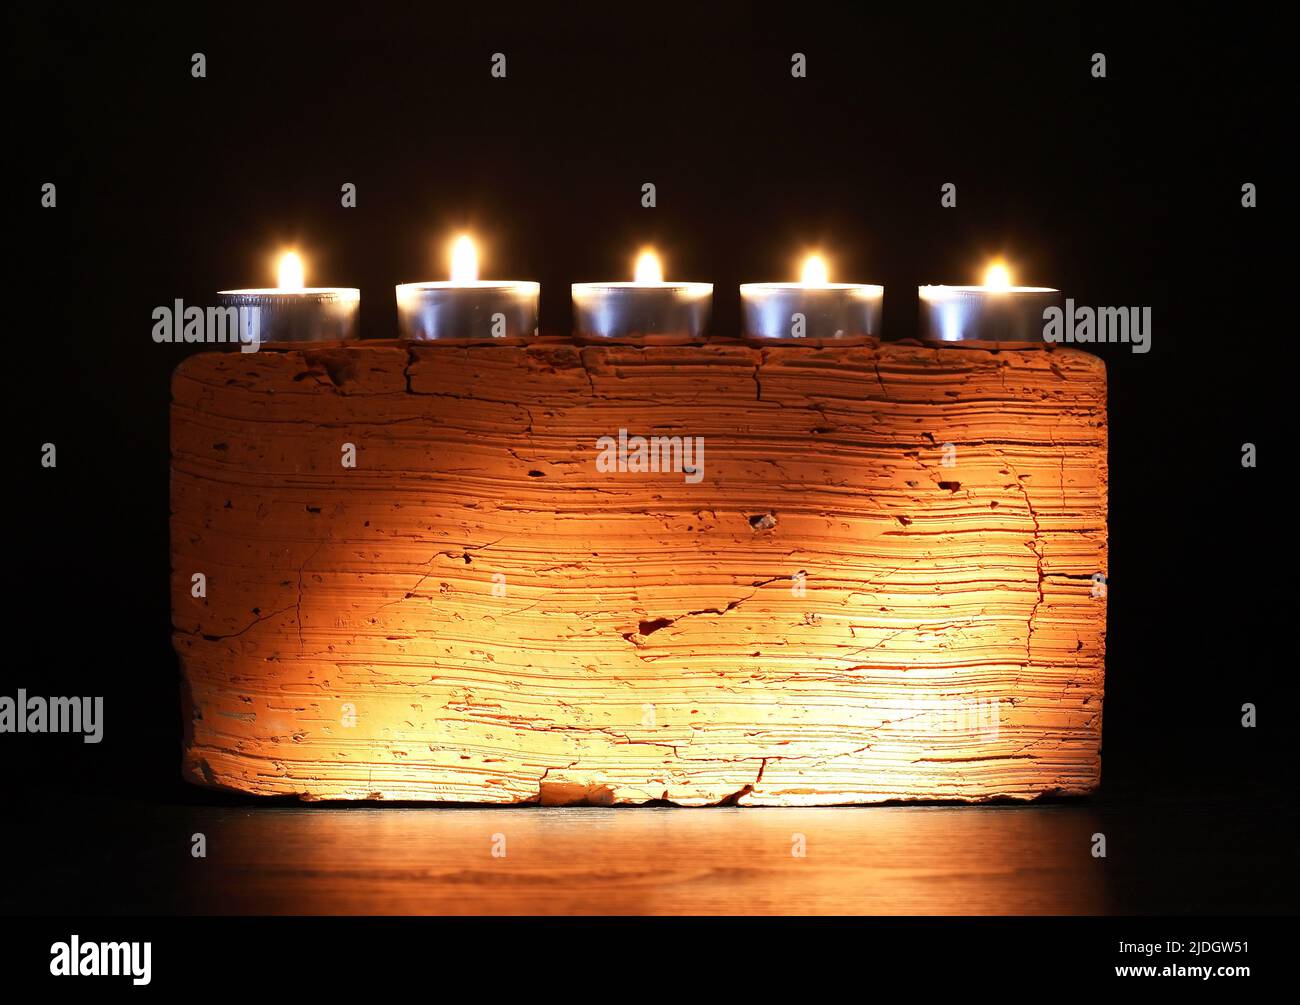 Set of lighting candles in a row against dark background Stock Photo